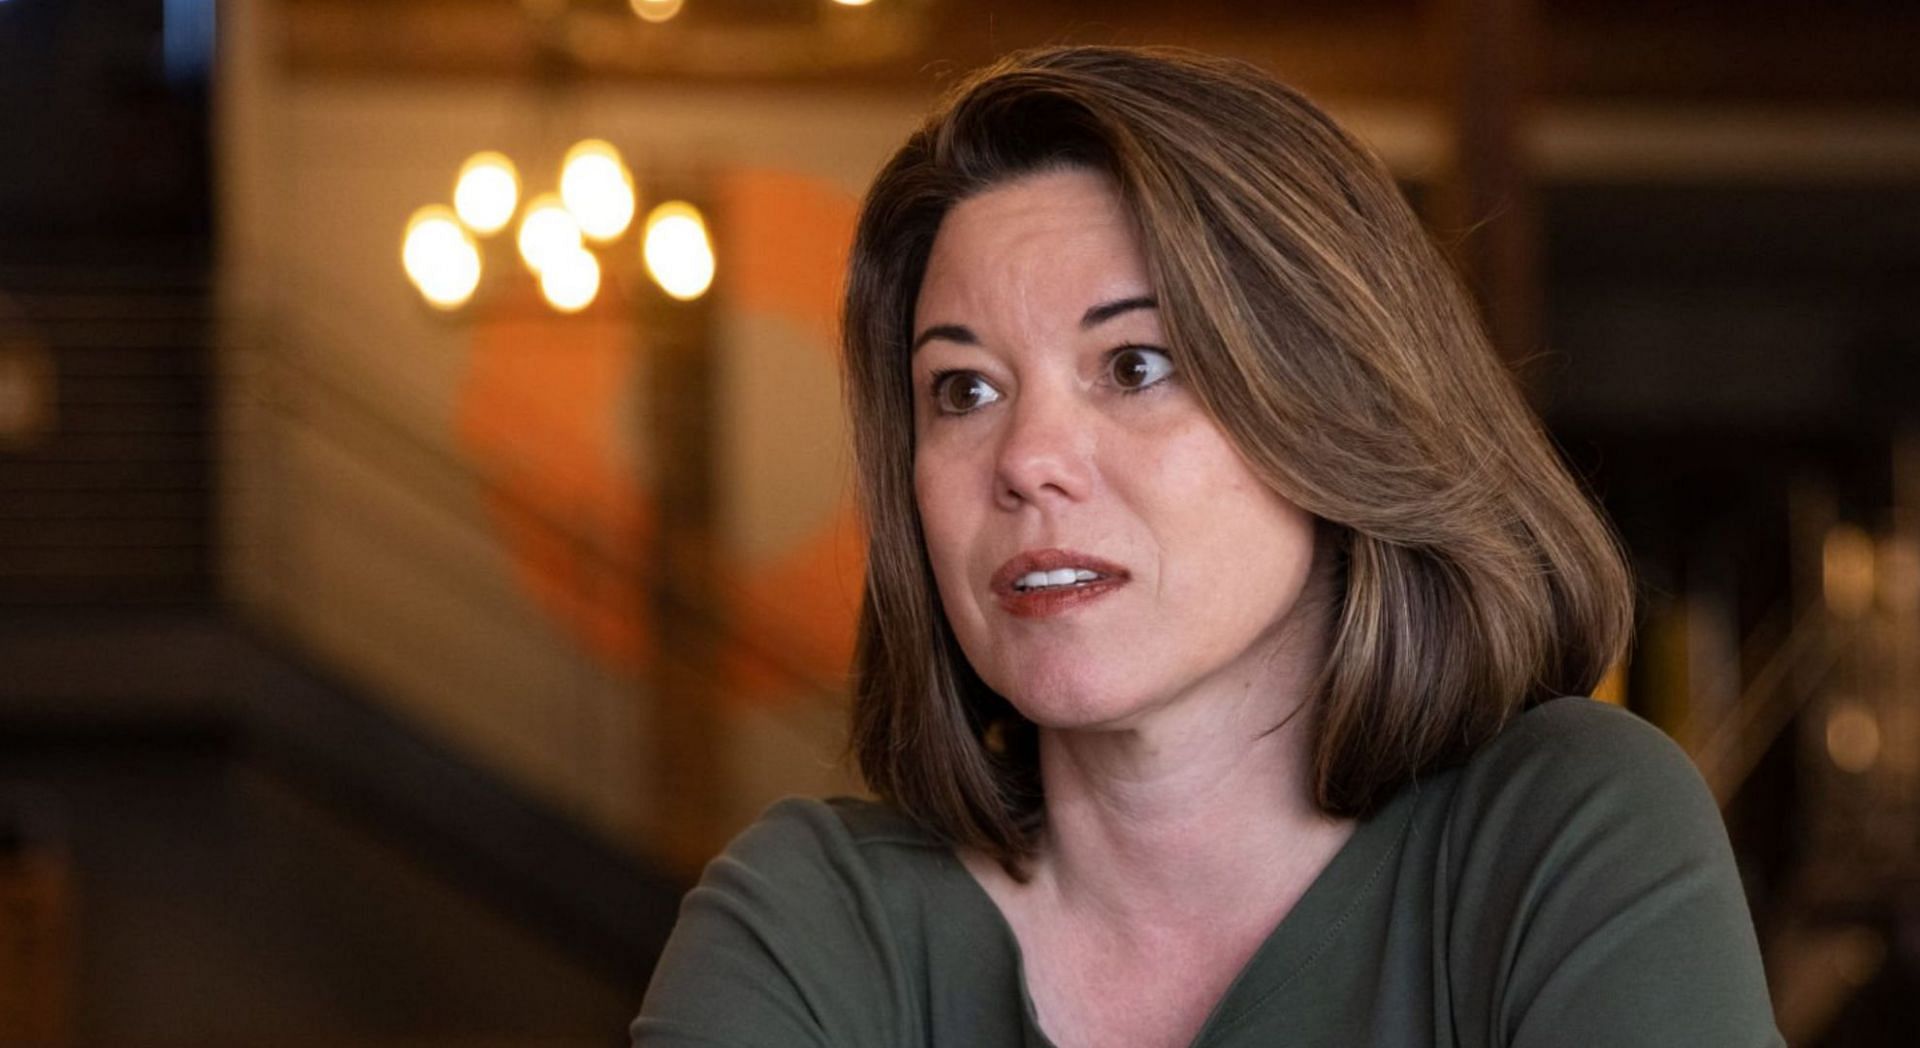 Rep. Angie Craig was recently attacked inside the elevator of her Washington apartment building (Image via Getty Images)